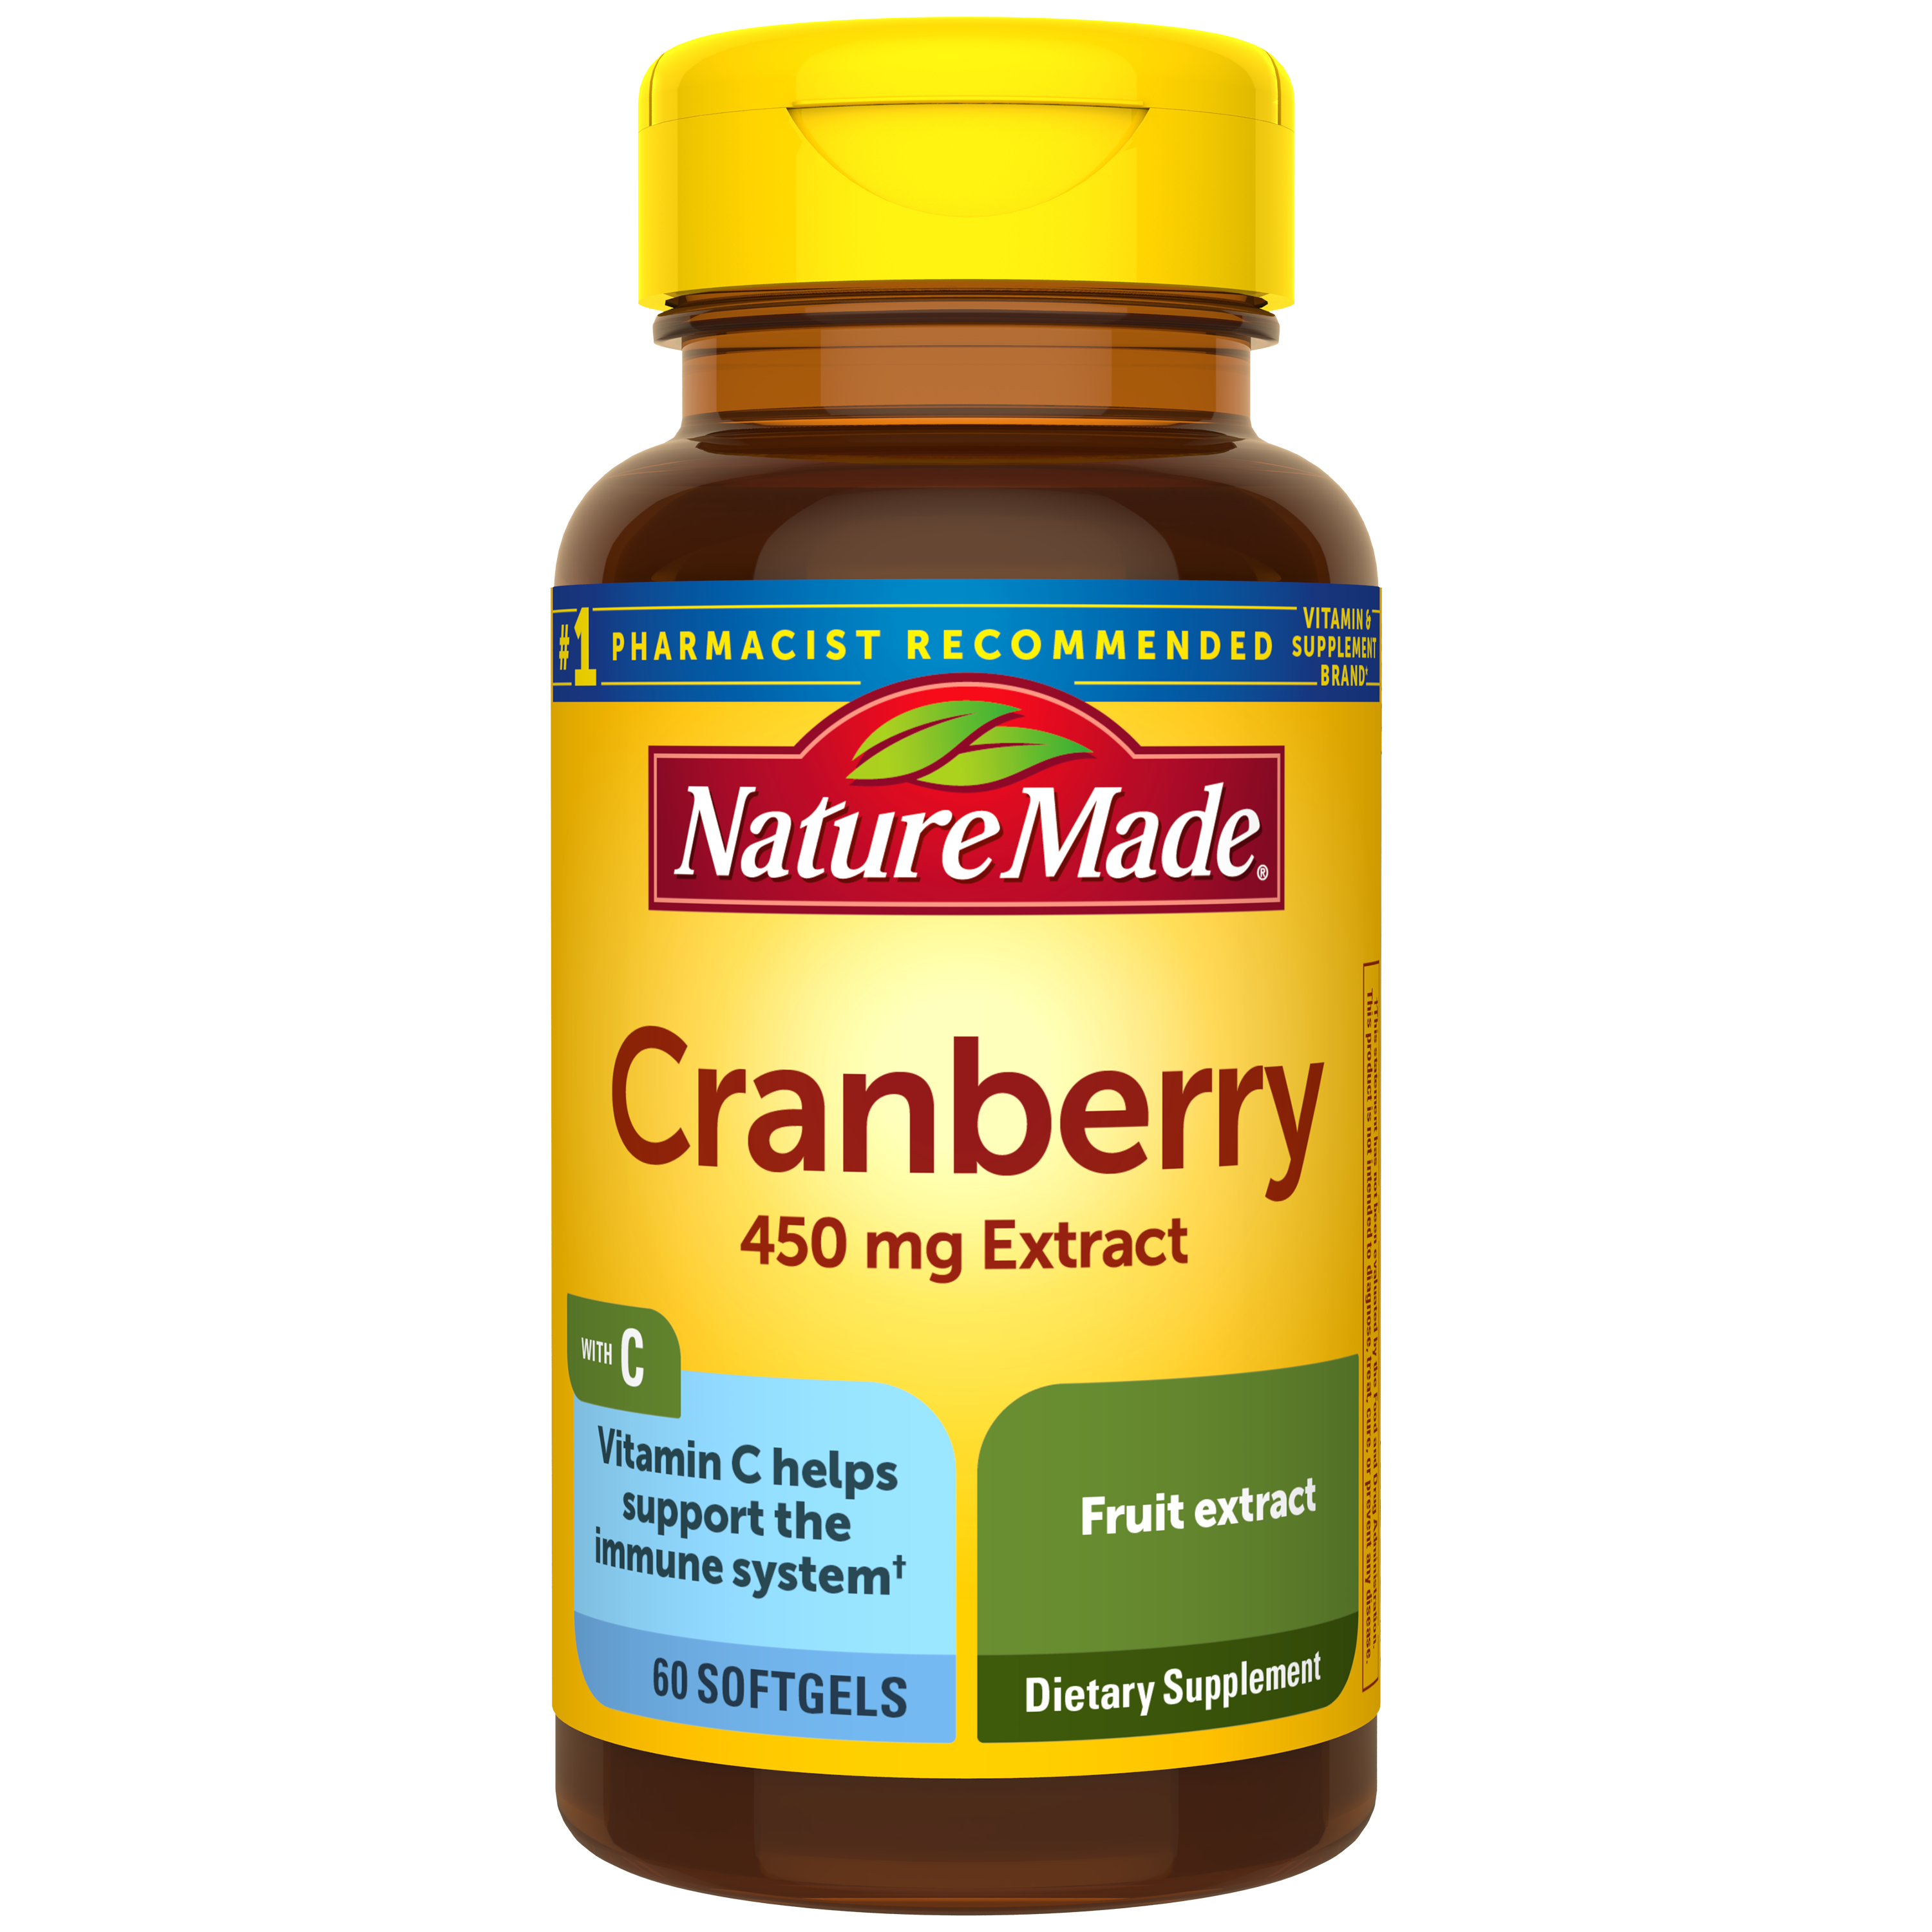 Photos - Vitamins & Minerals Nature Made Nature Made Cranberry Super Strength 450 mg with Vitamin C Sof